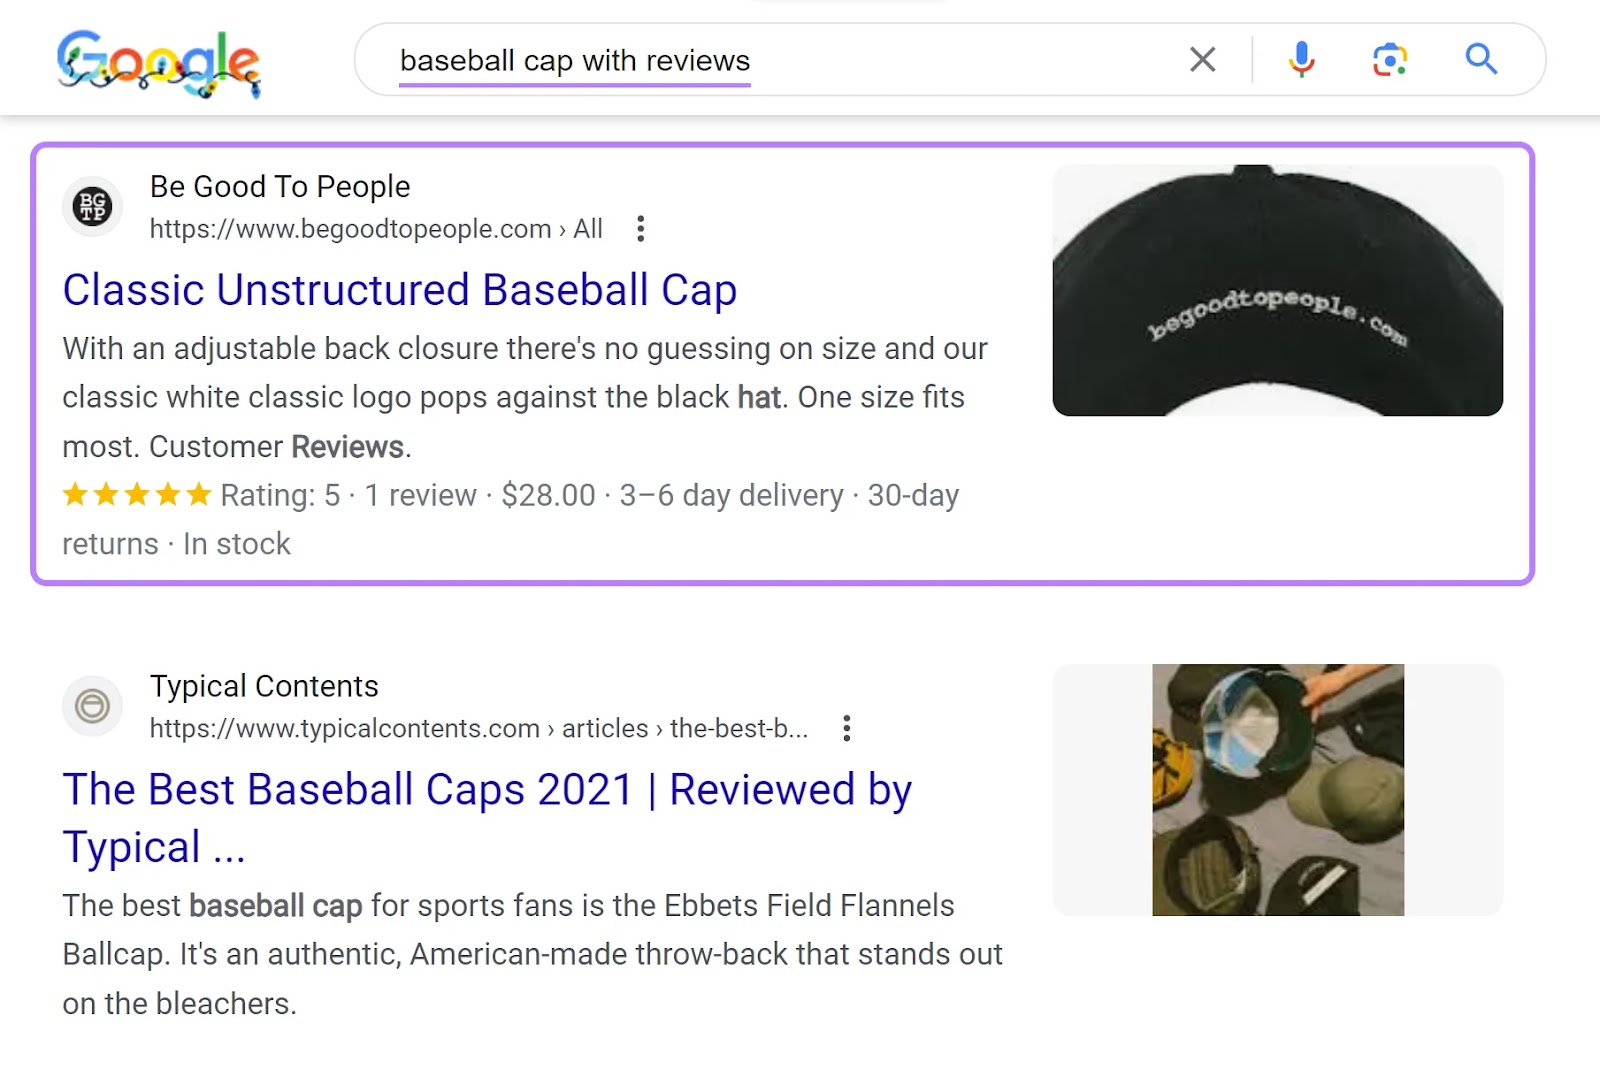 Google search result for "baseball cap with reviews" with a star rating highlighted